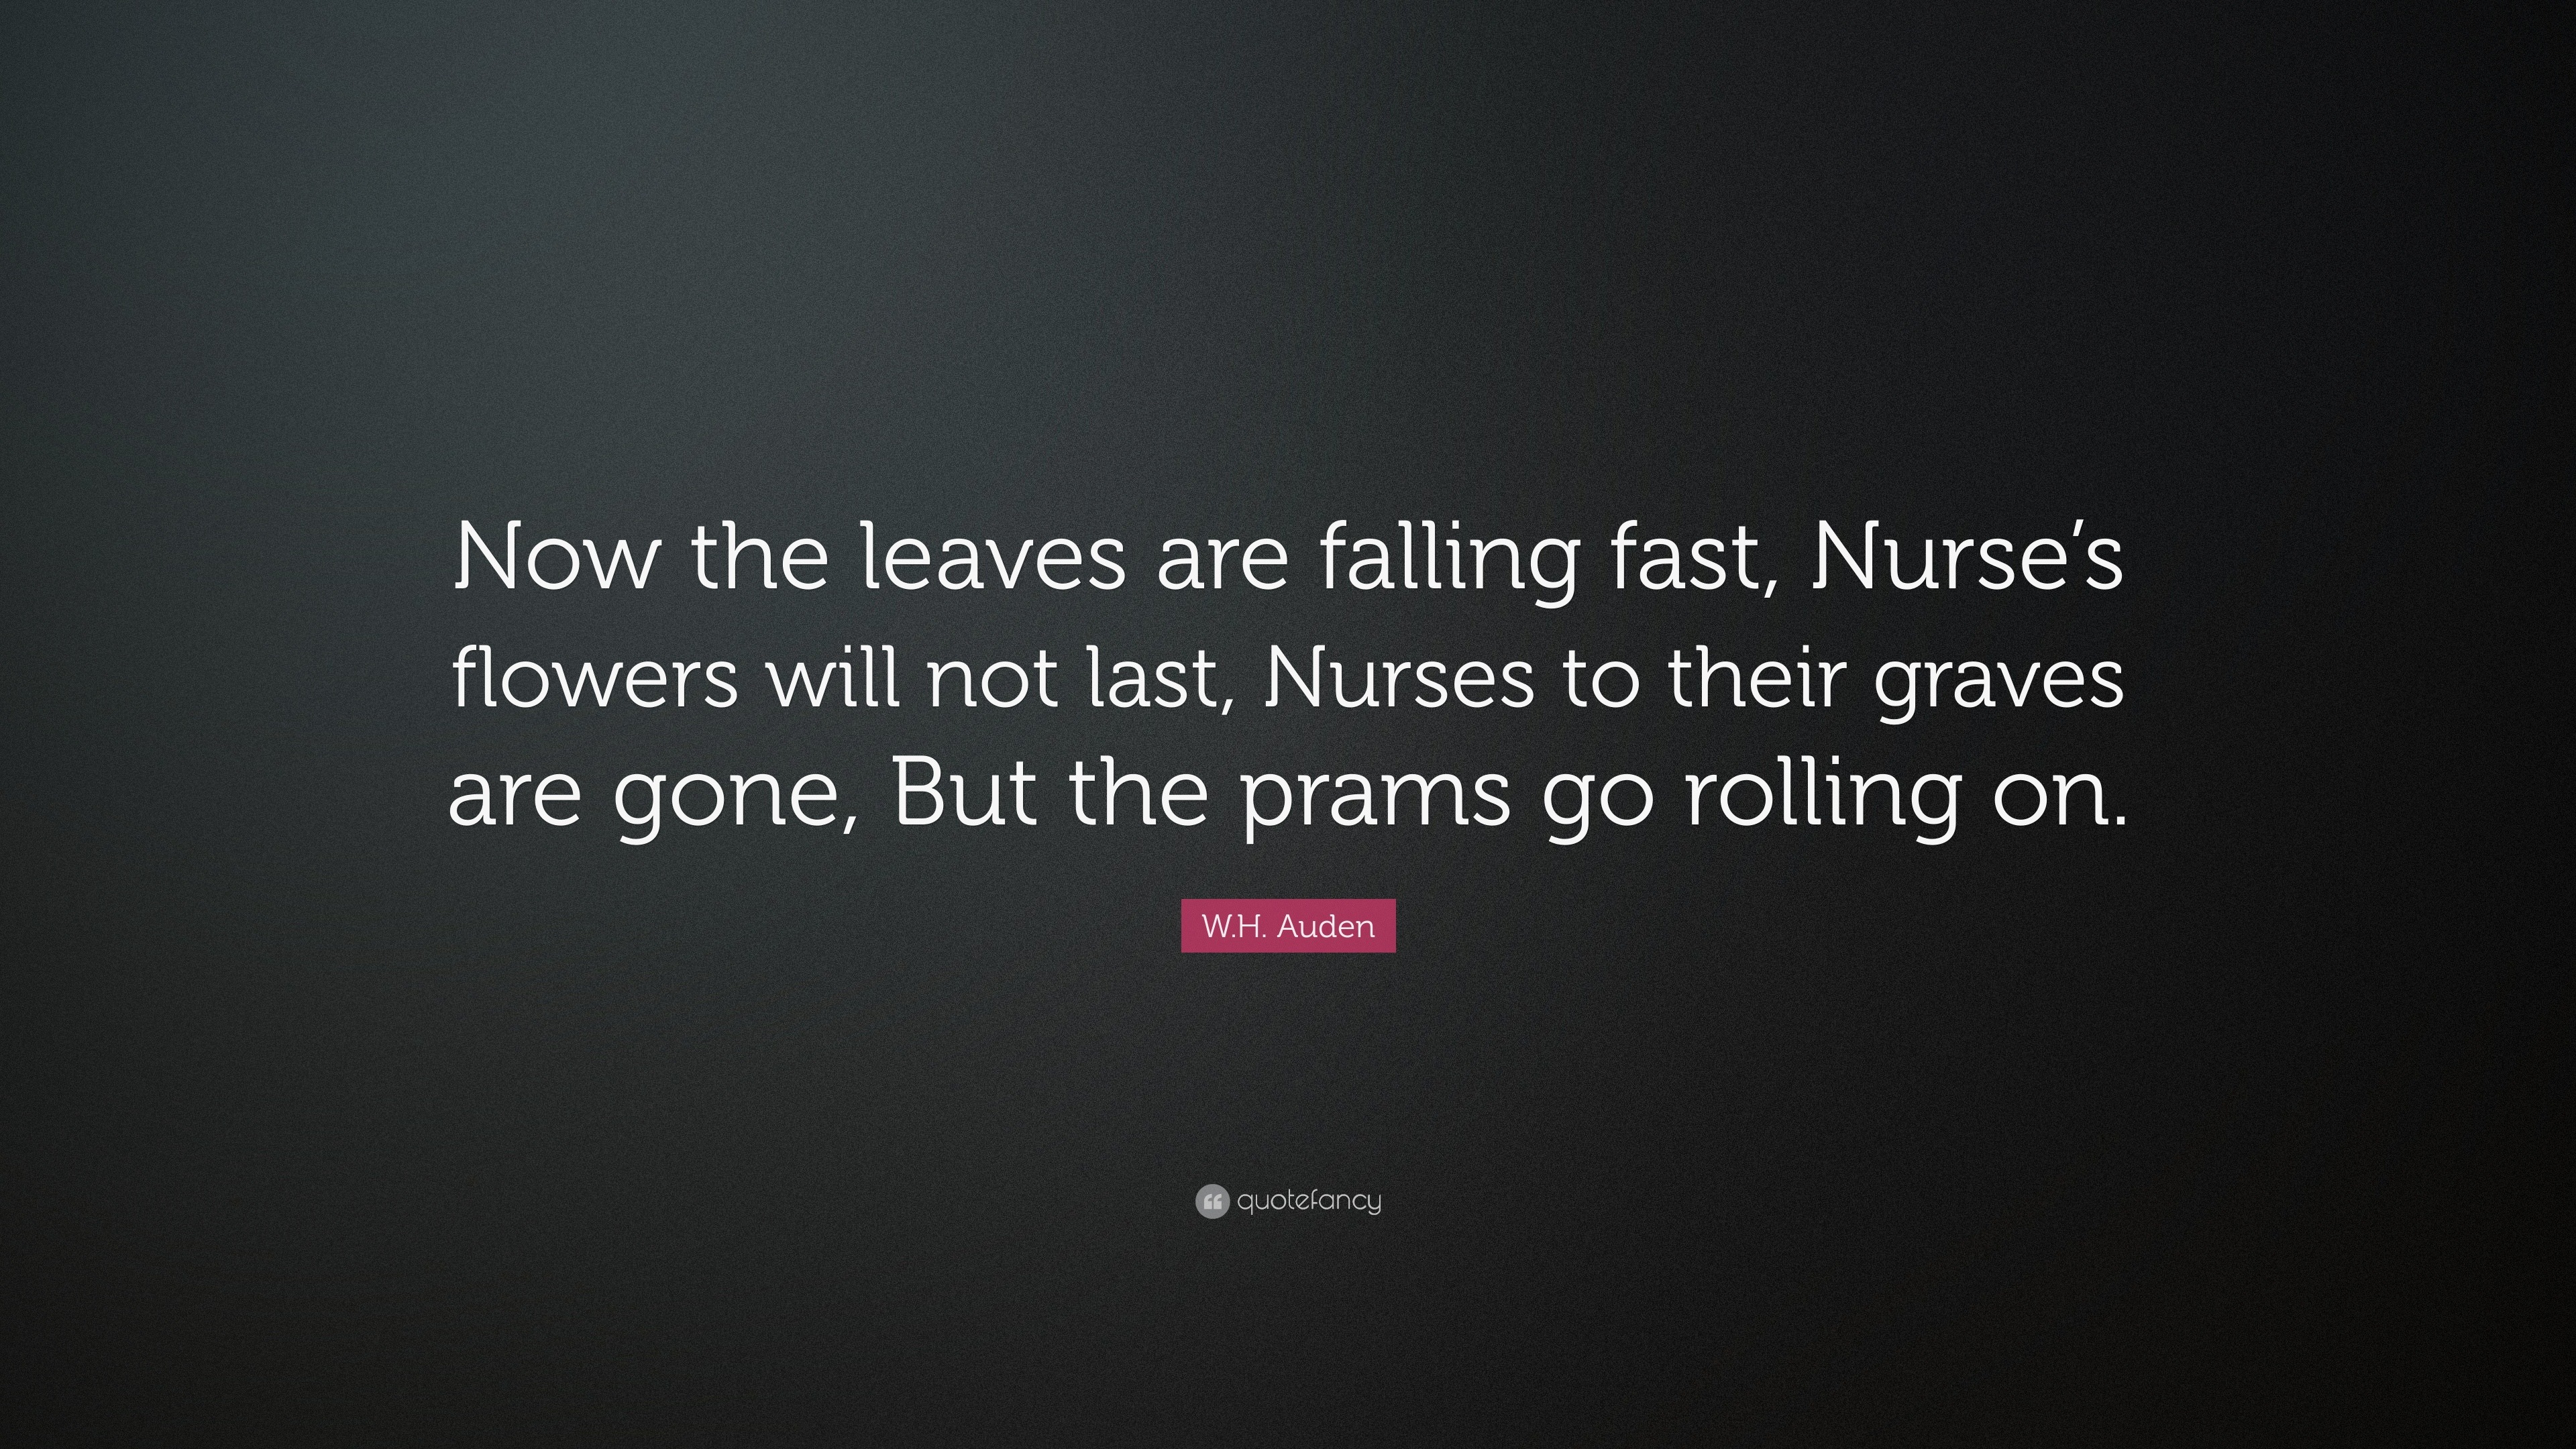 W.H. Auden Quote: “Now the leaves are falling fast, Nurse's